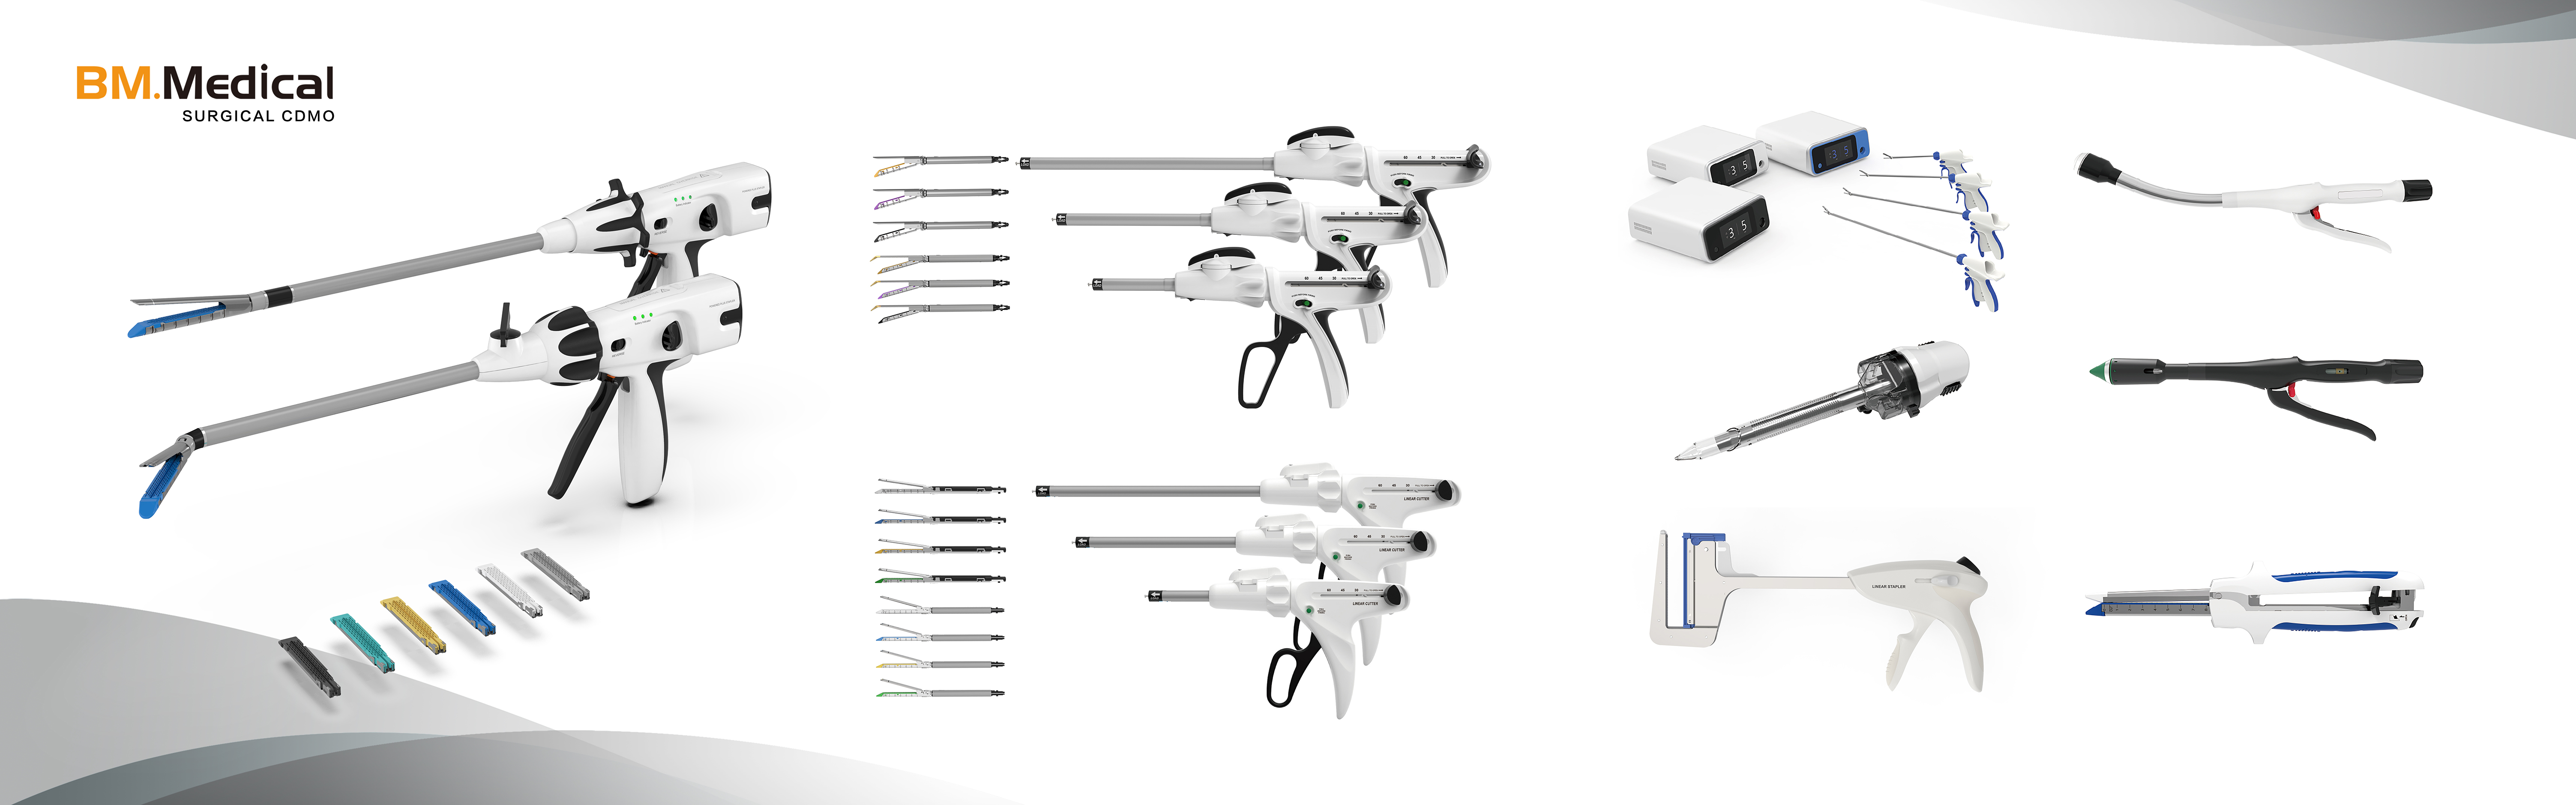 Surgical staplers and loading units for open and endoscopic surgery